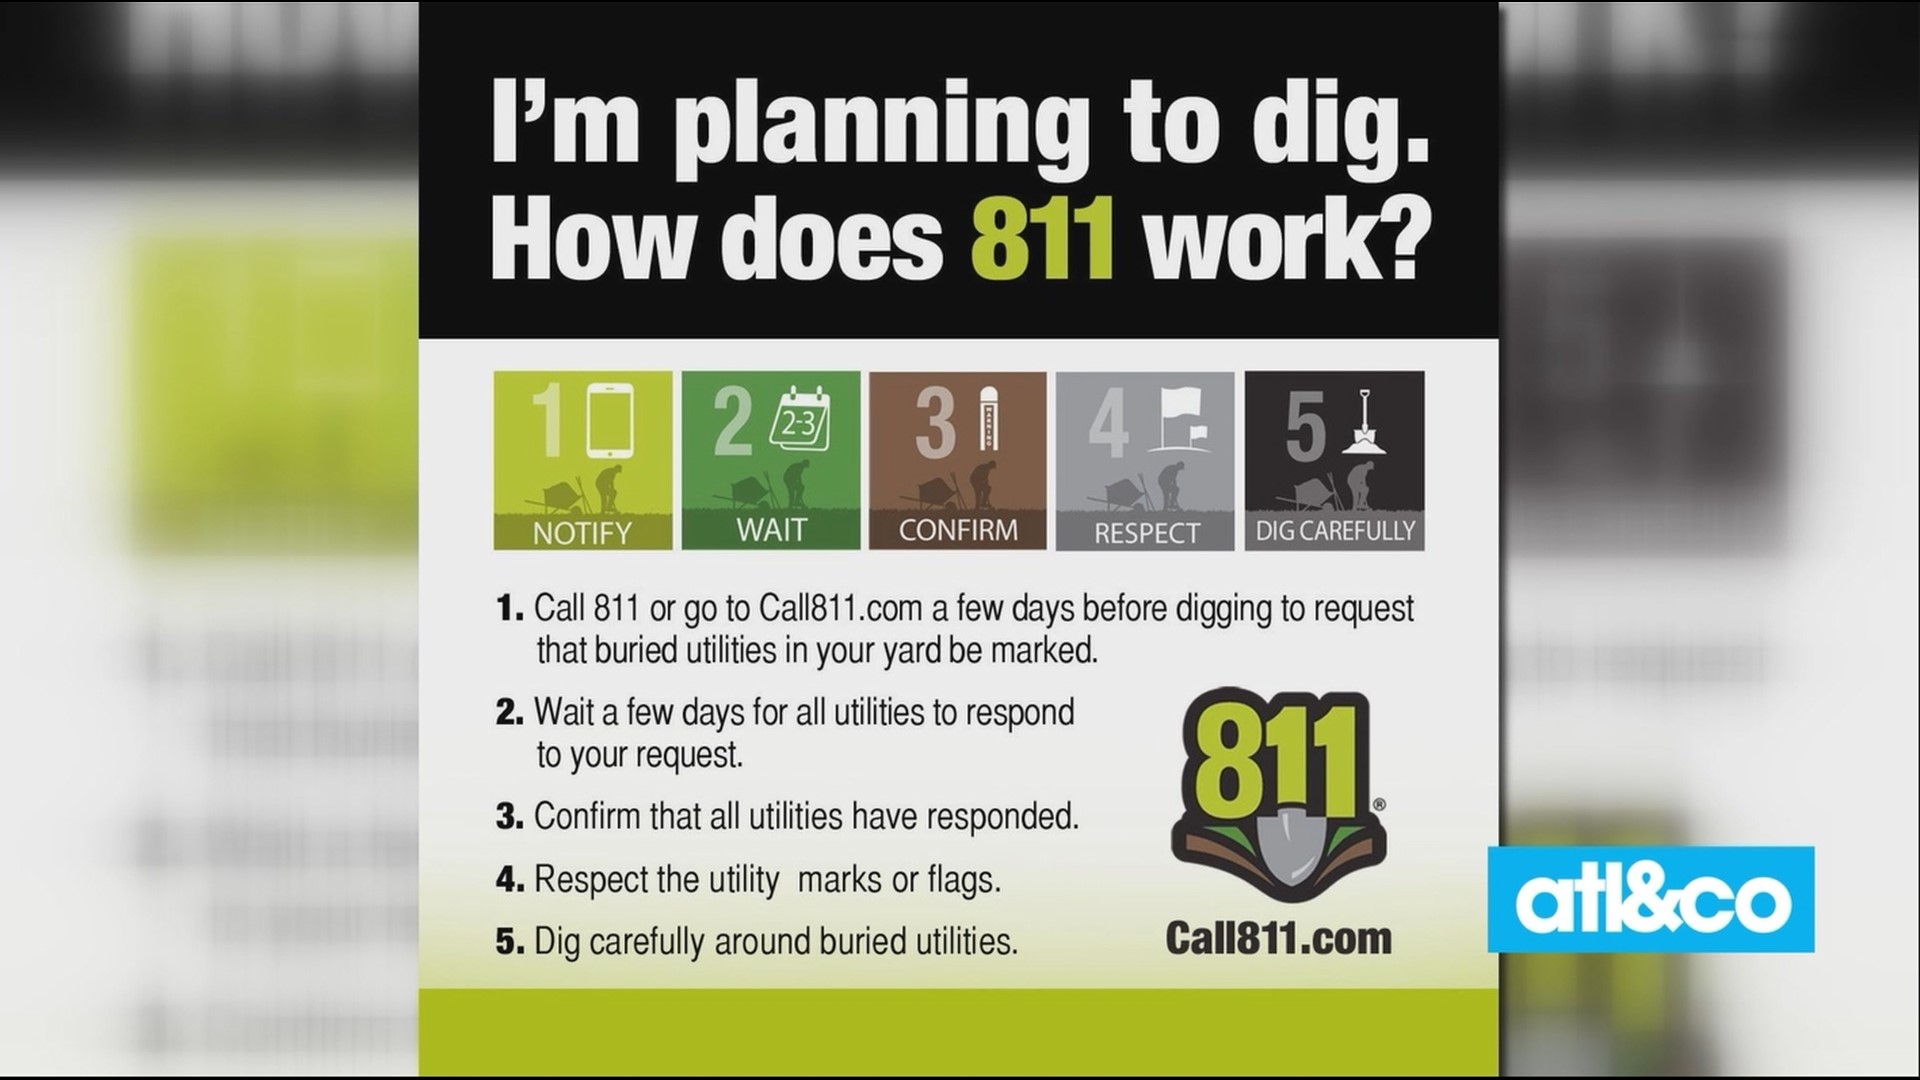 Call before you dig! Know what's below and avoid underground utilities when you contact Georgia 811 before digging.